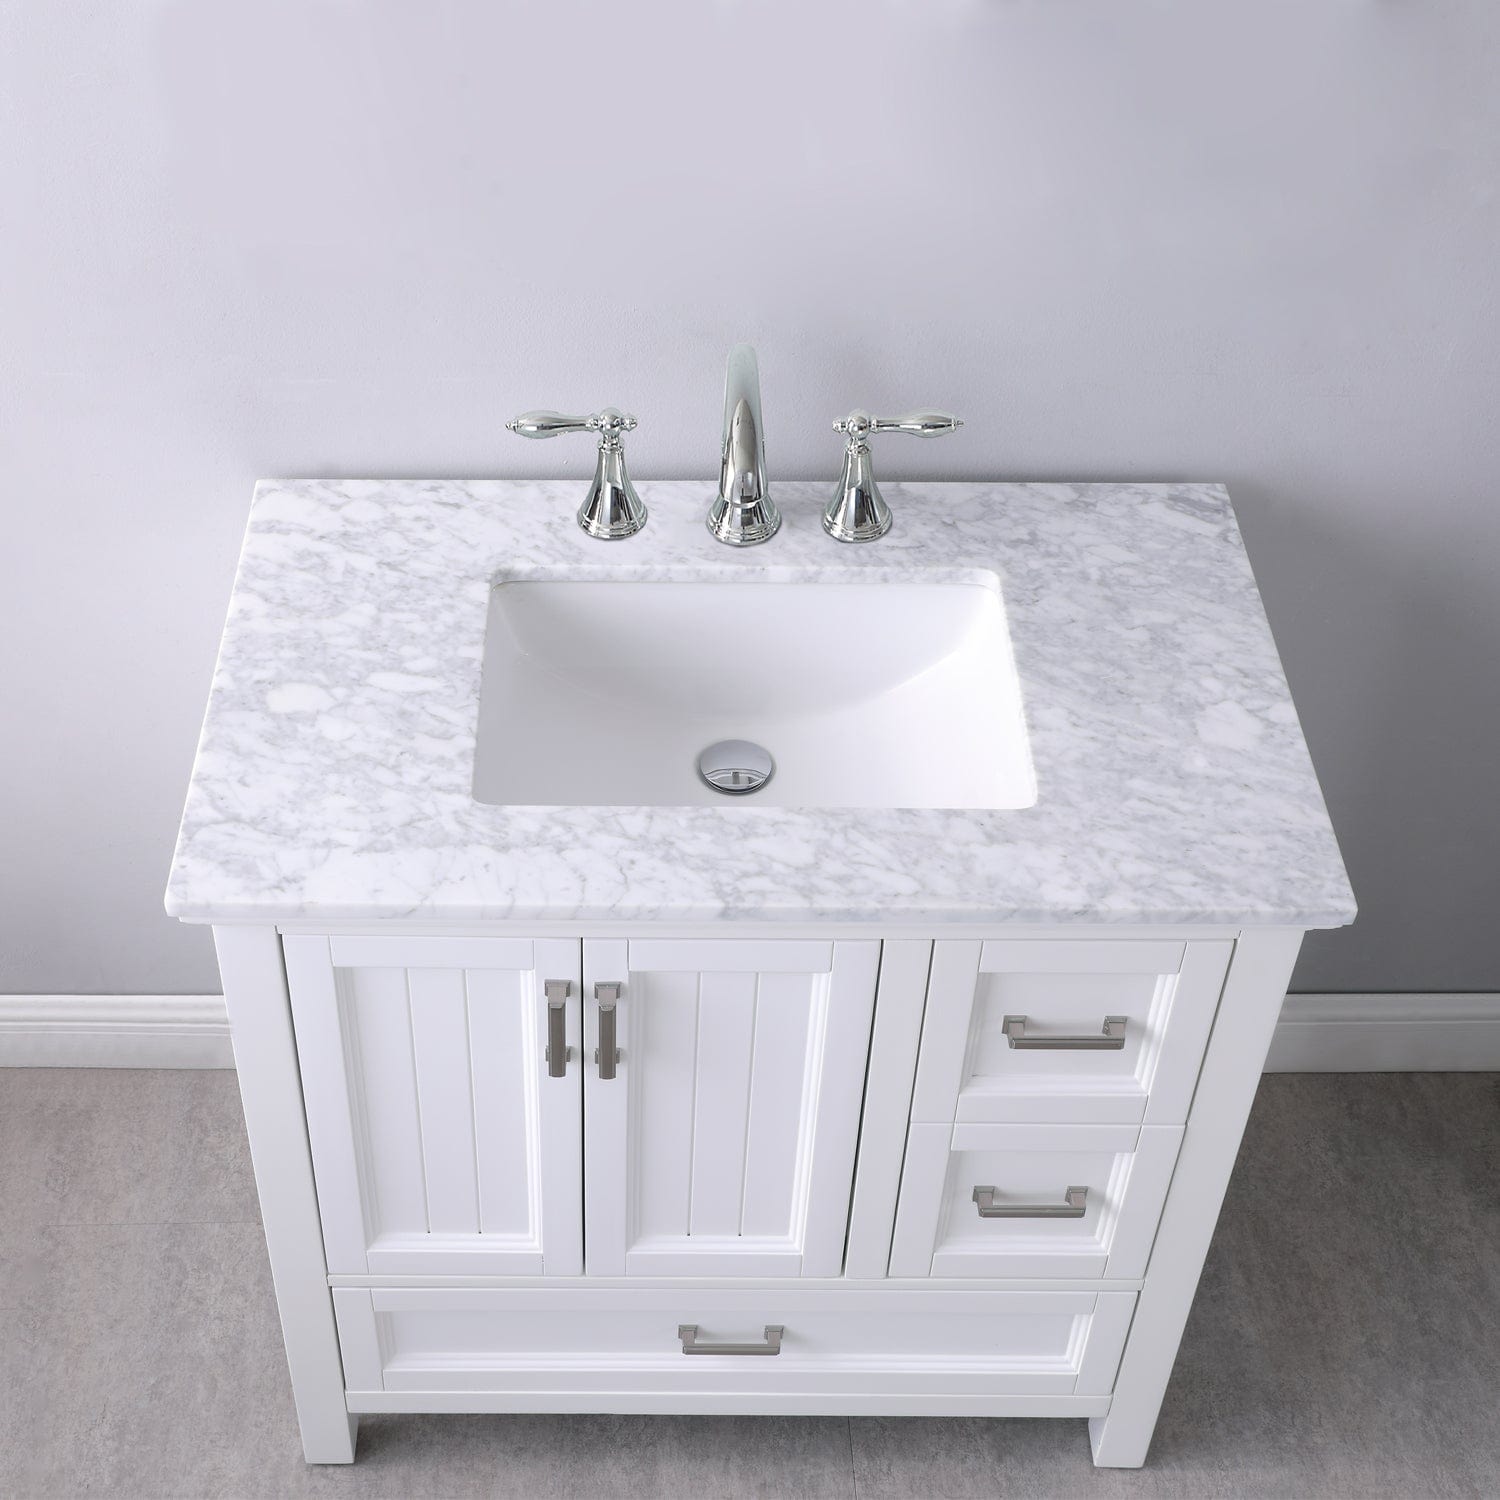 Altair Isla 36" Single Bathroom Vanity Set in White and Carrara White Marble Countertop without Mirror 538036-WH-CA-NM - Molaix631112970822Vanity538036-WH-CA-NM